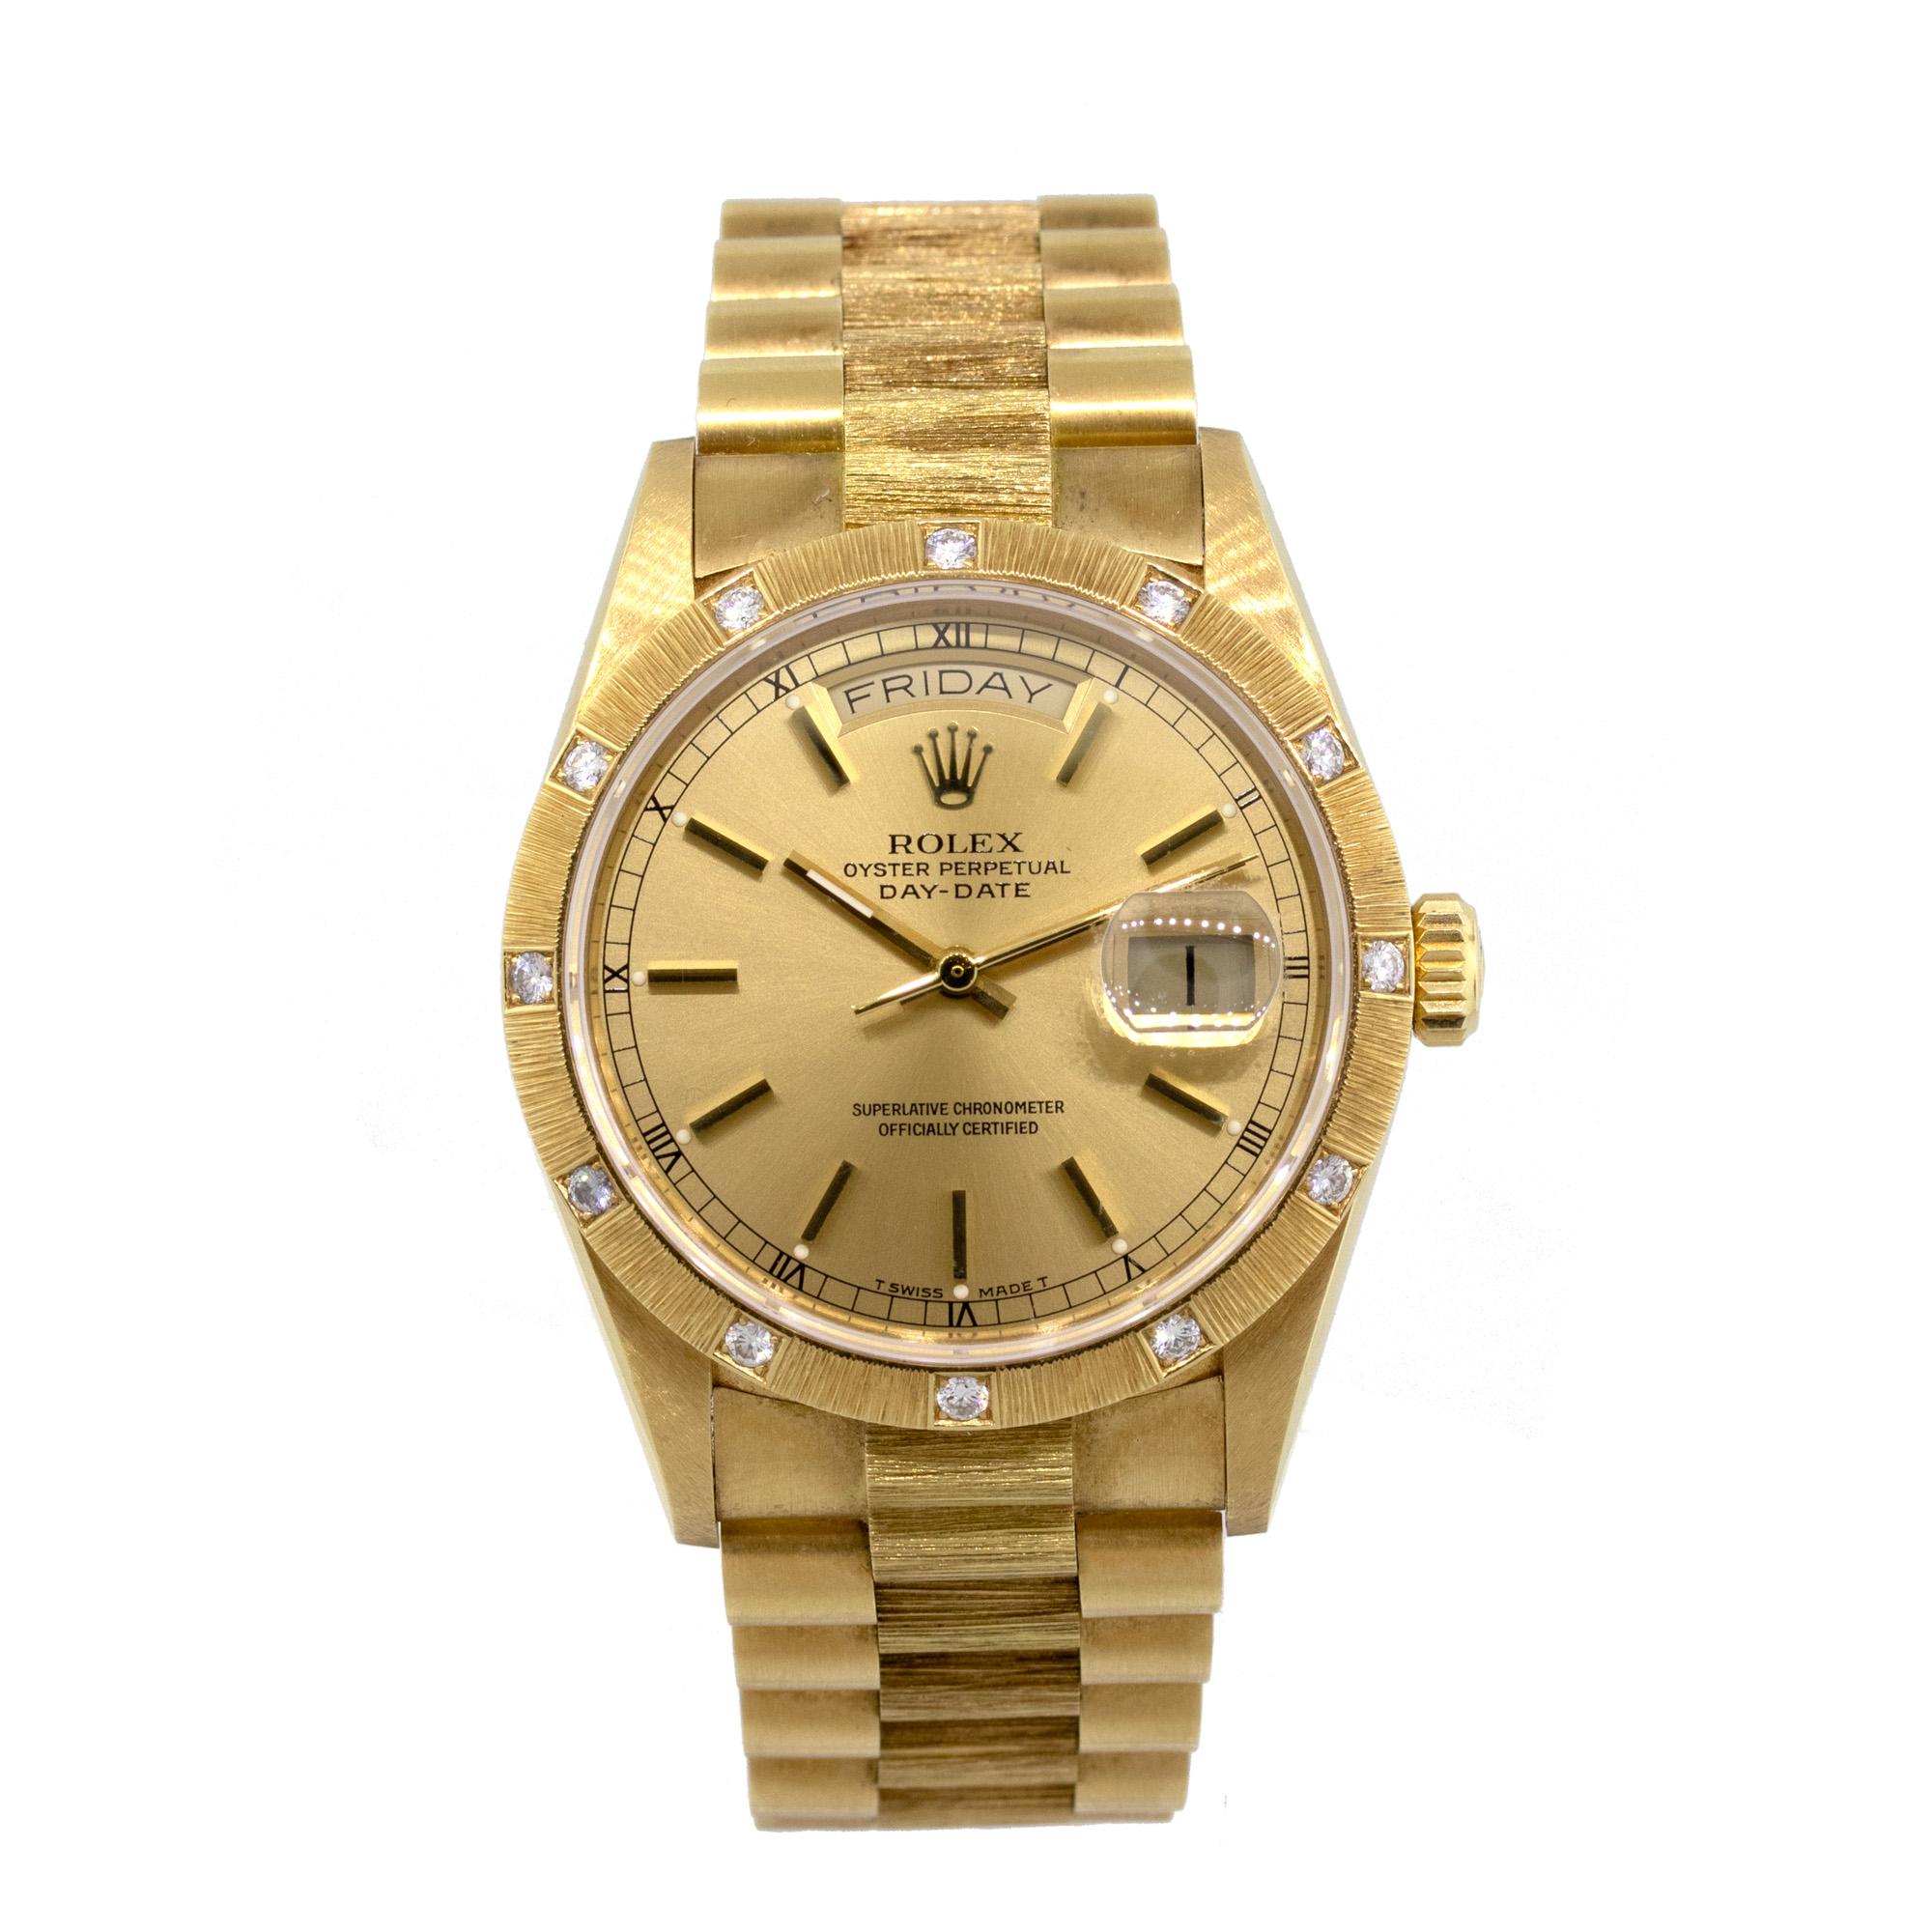 Brand: Rolex
MPN: 18108
Model: Day Date
Case Material: 18k yellow gold
Case Diameter: 36mm
Crystal: scratch resistant sapphire
Bezel: 18k yellow gold bark finish with factory Diamonds
Dial: Champagne dial. Date can be found at 3 o’Clock as well as